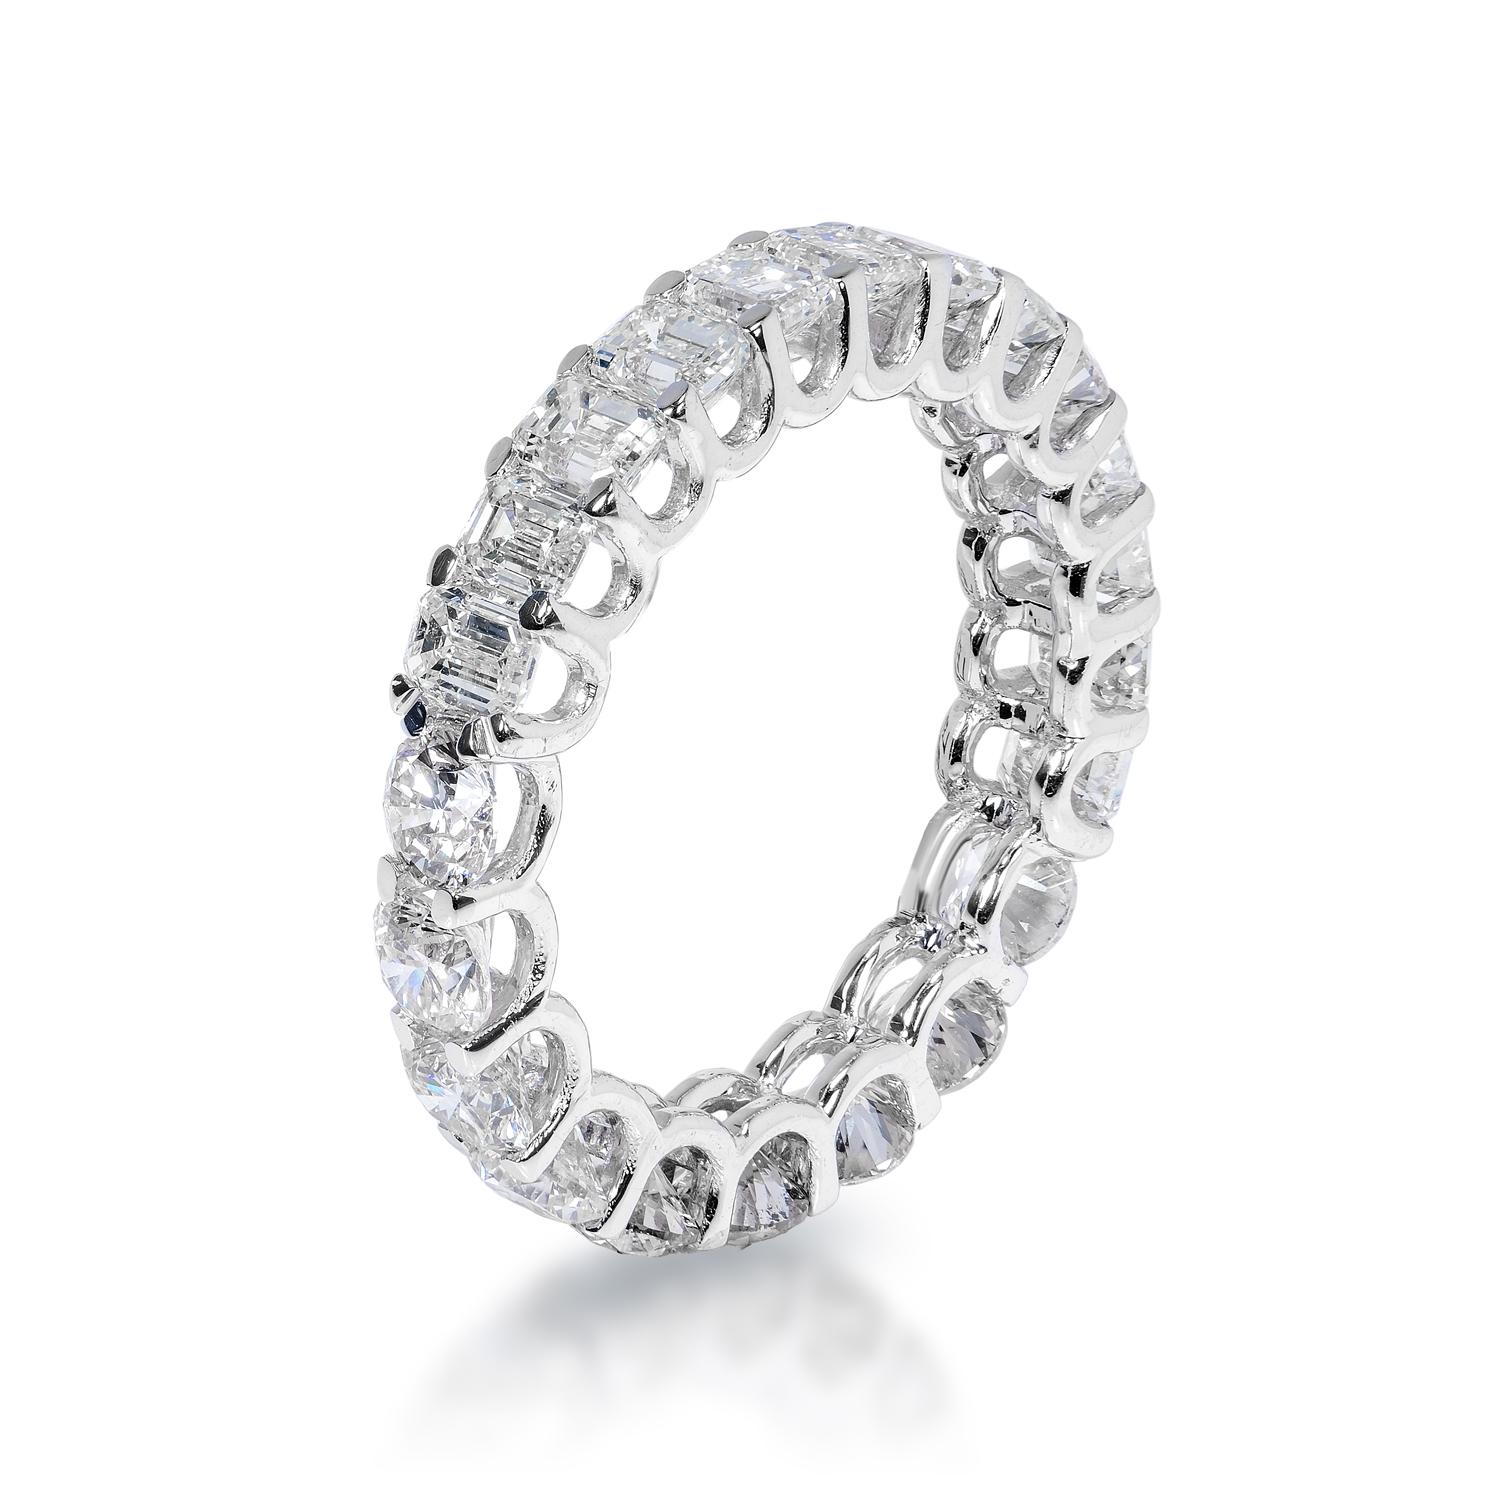 Anaya 3 Carat Undecided Eternity Band With Round and Emerald Cut  in 14k White Gold U-Shape Shared Prong

Eternity Band Diamond:
Carat Weight: 3.27 Carats
Style: Round and Emerald Cut

Setting: U-shape Shared Prong
Metal: 14 Karat White Gold

Total